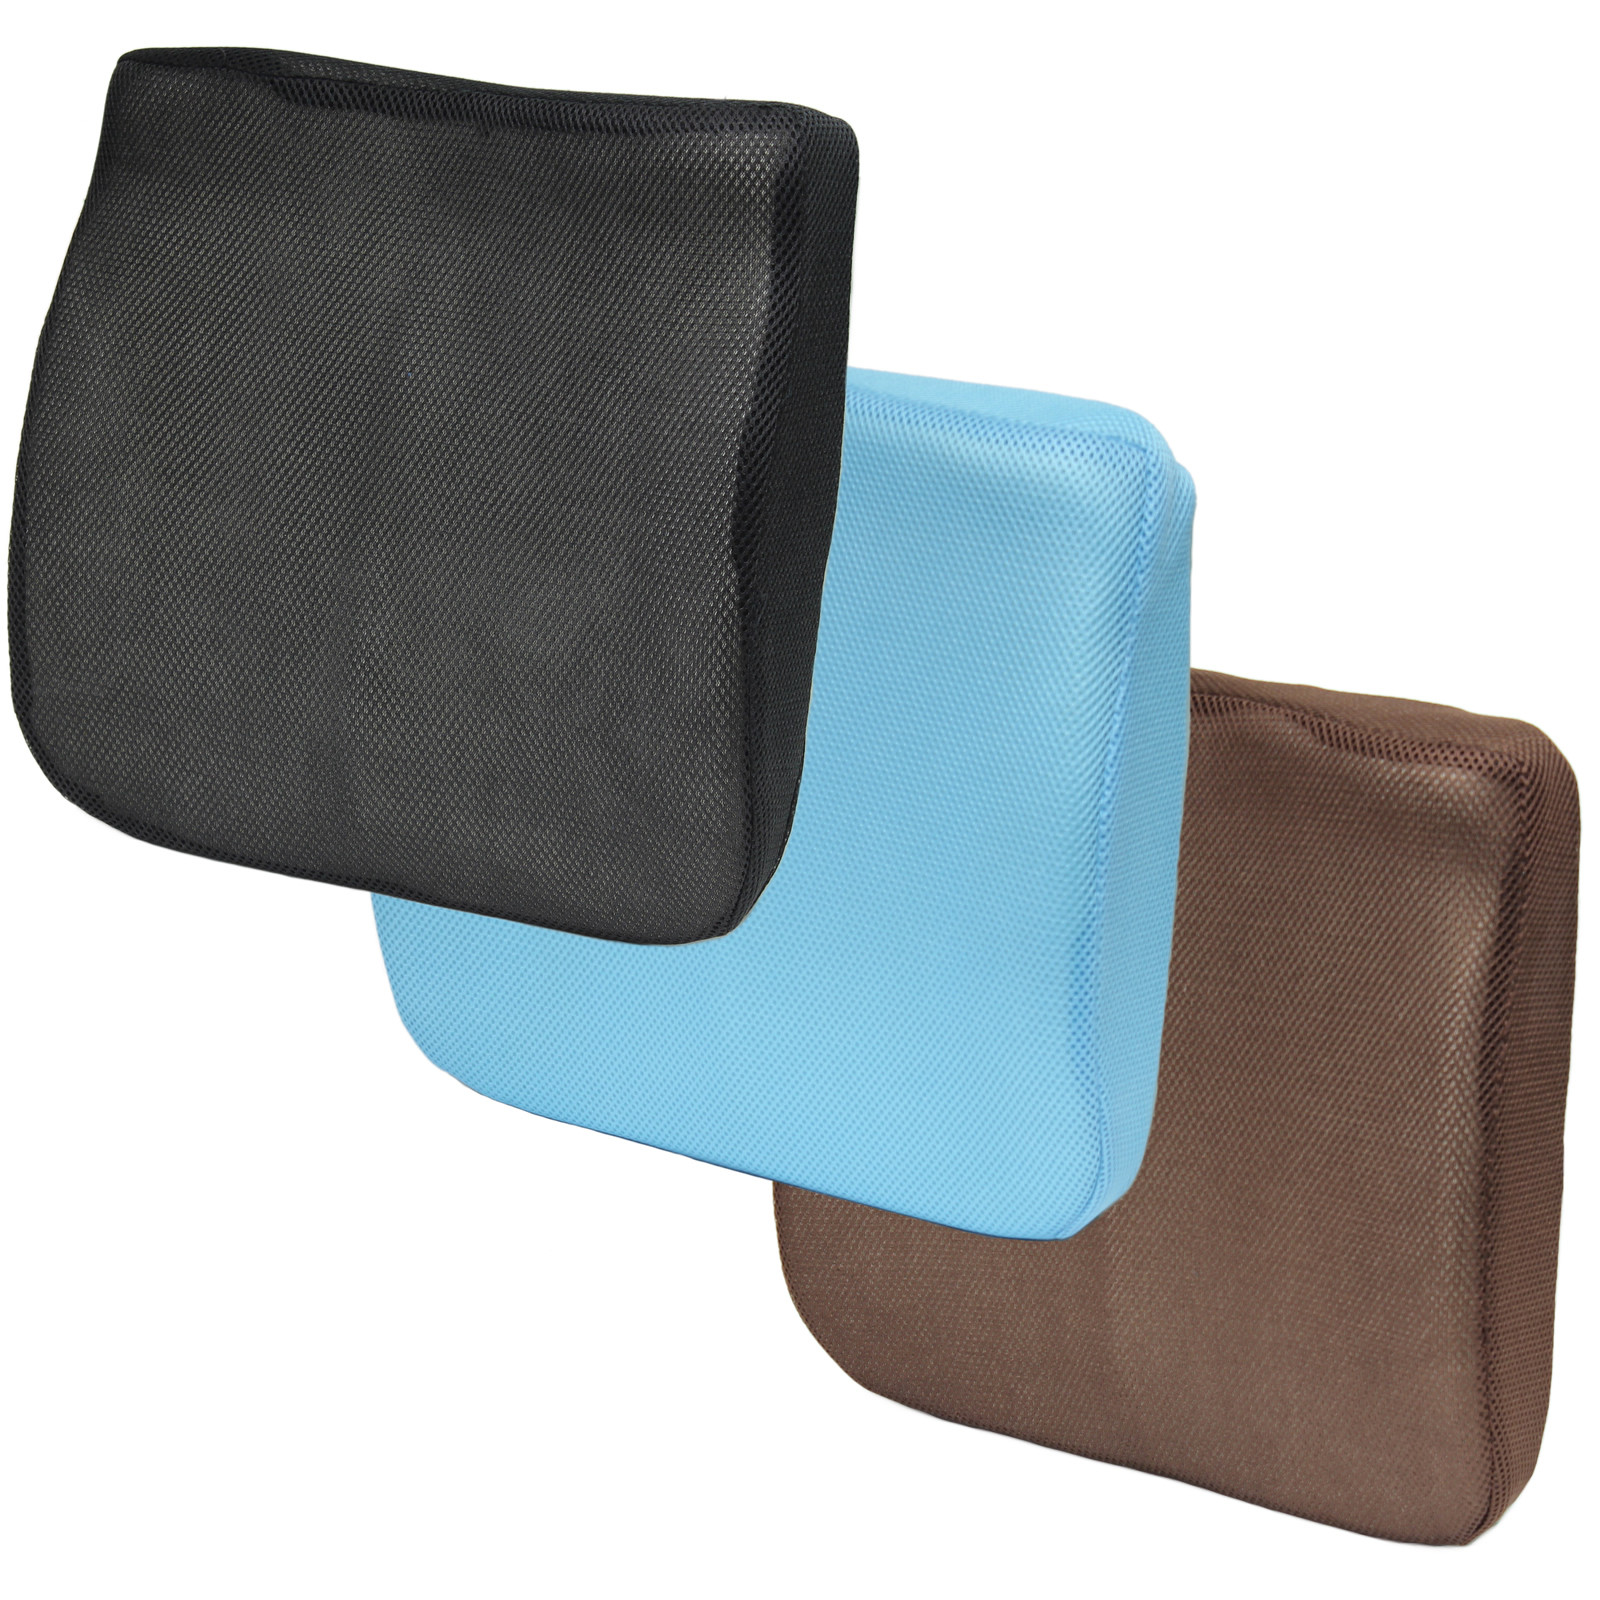 Best ideas about Desk Chair Cushion
. Save or Pin 3D MESH MEMORY FOAM SEAT CUSHION LOWER BACK LUMBAR SUPPORT Now.